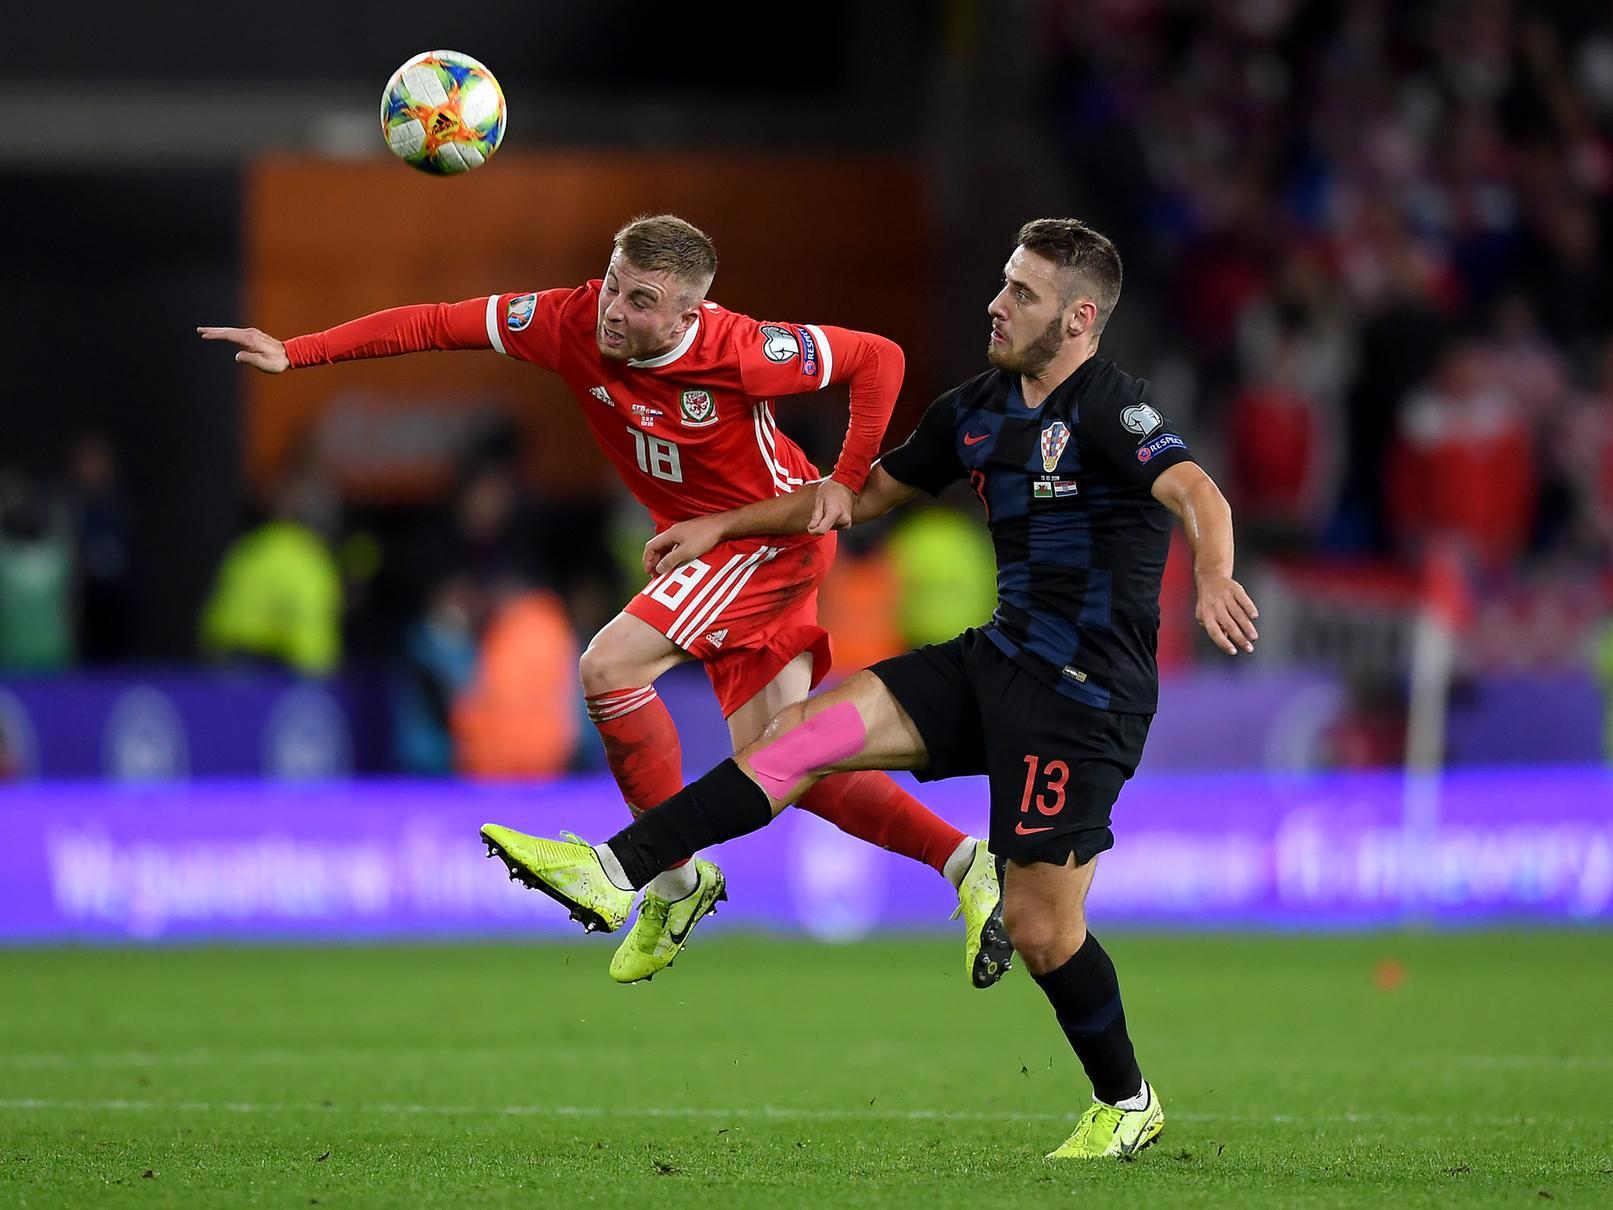 Bristol City defender Joe Morrell, who is currently out on loan with Bristol City, has extended his contract with the Robins until 2022. He was part of the Wales side that secured qualification for Euro 2020. (Wales Online)